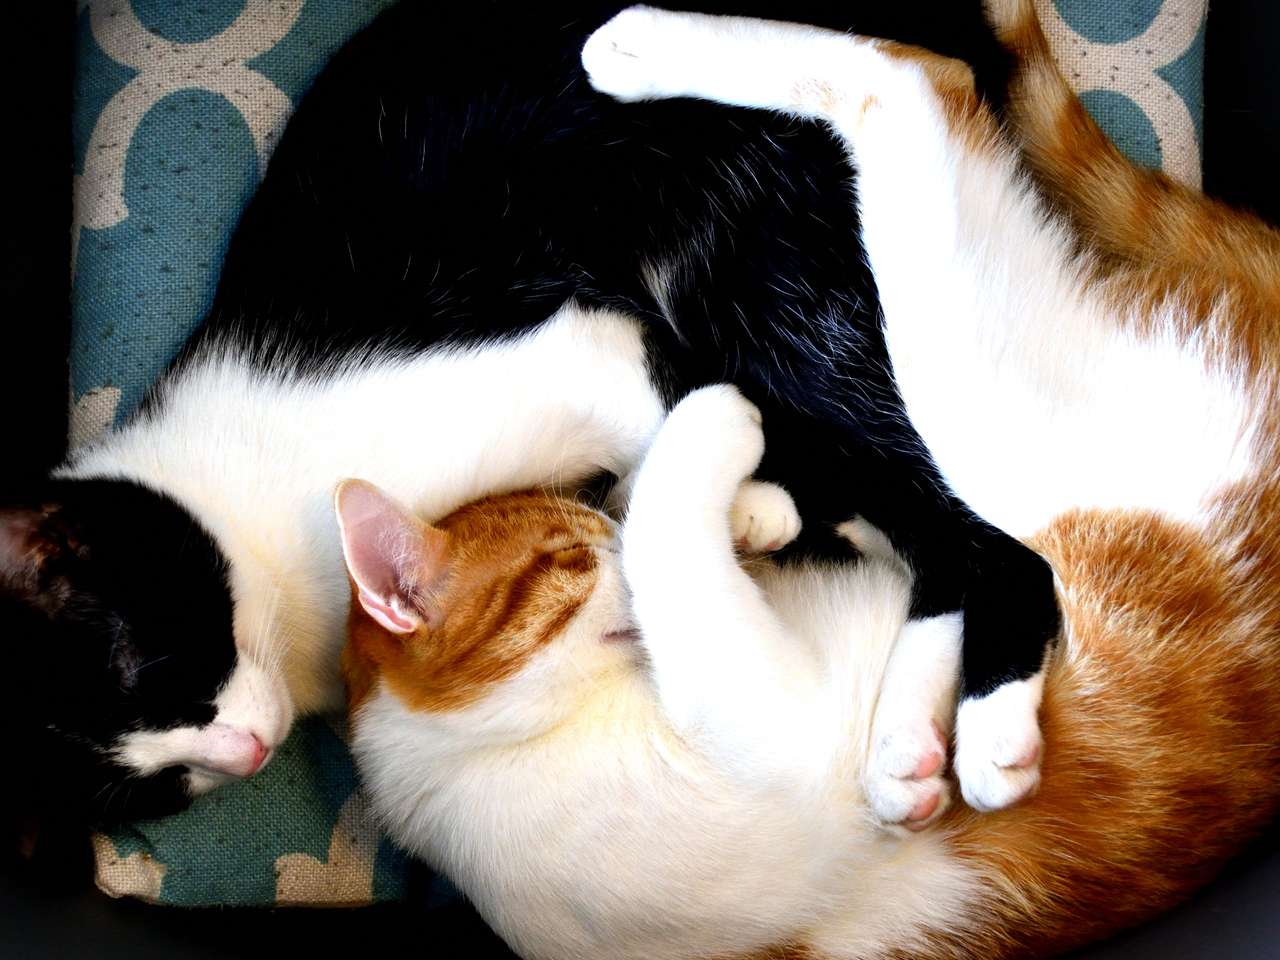 cats slep puzzle online from photo